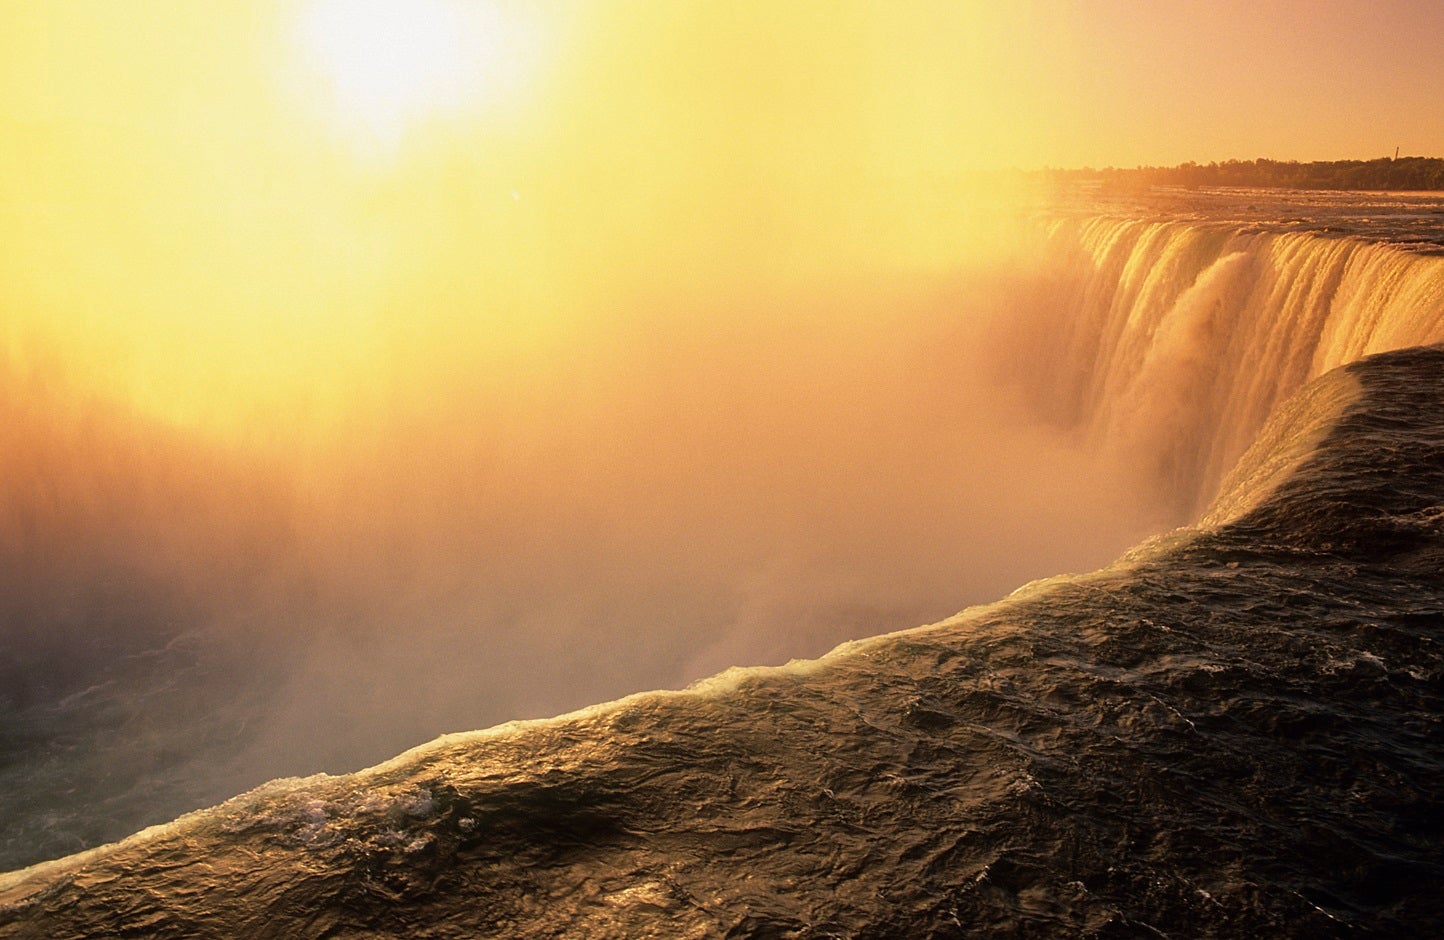 Niagra Fall is as iconic as it gets. Get two awesome perspectives by booking a boat tour and a helicopter ride